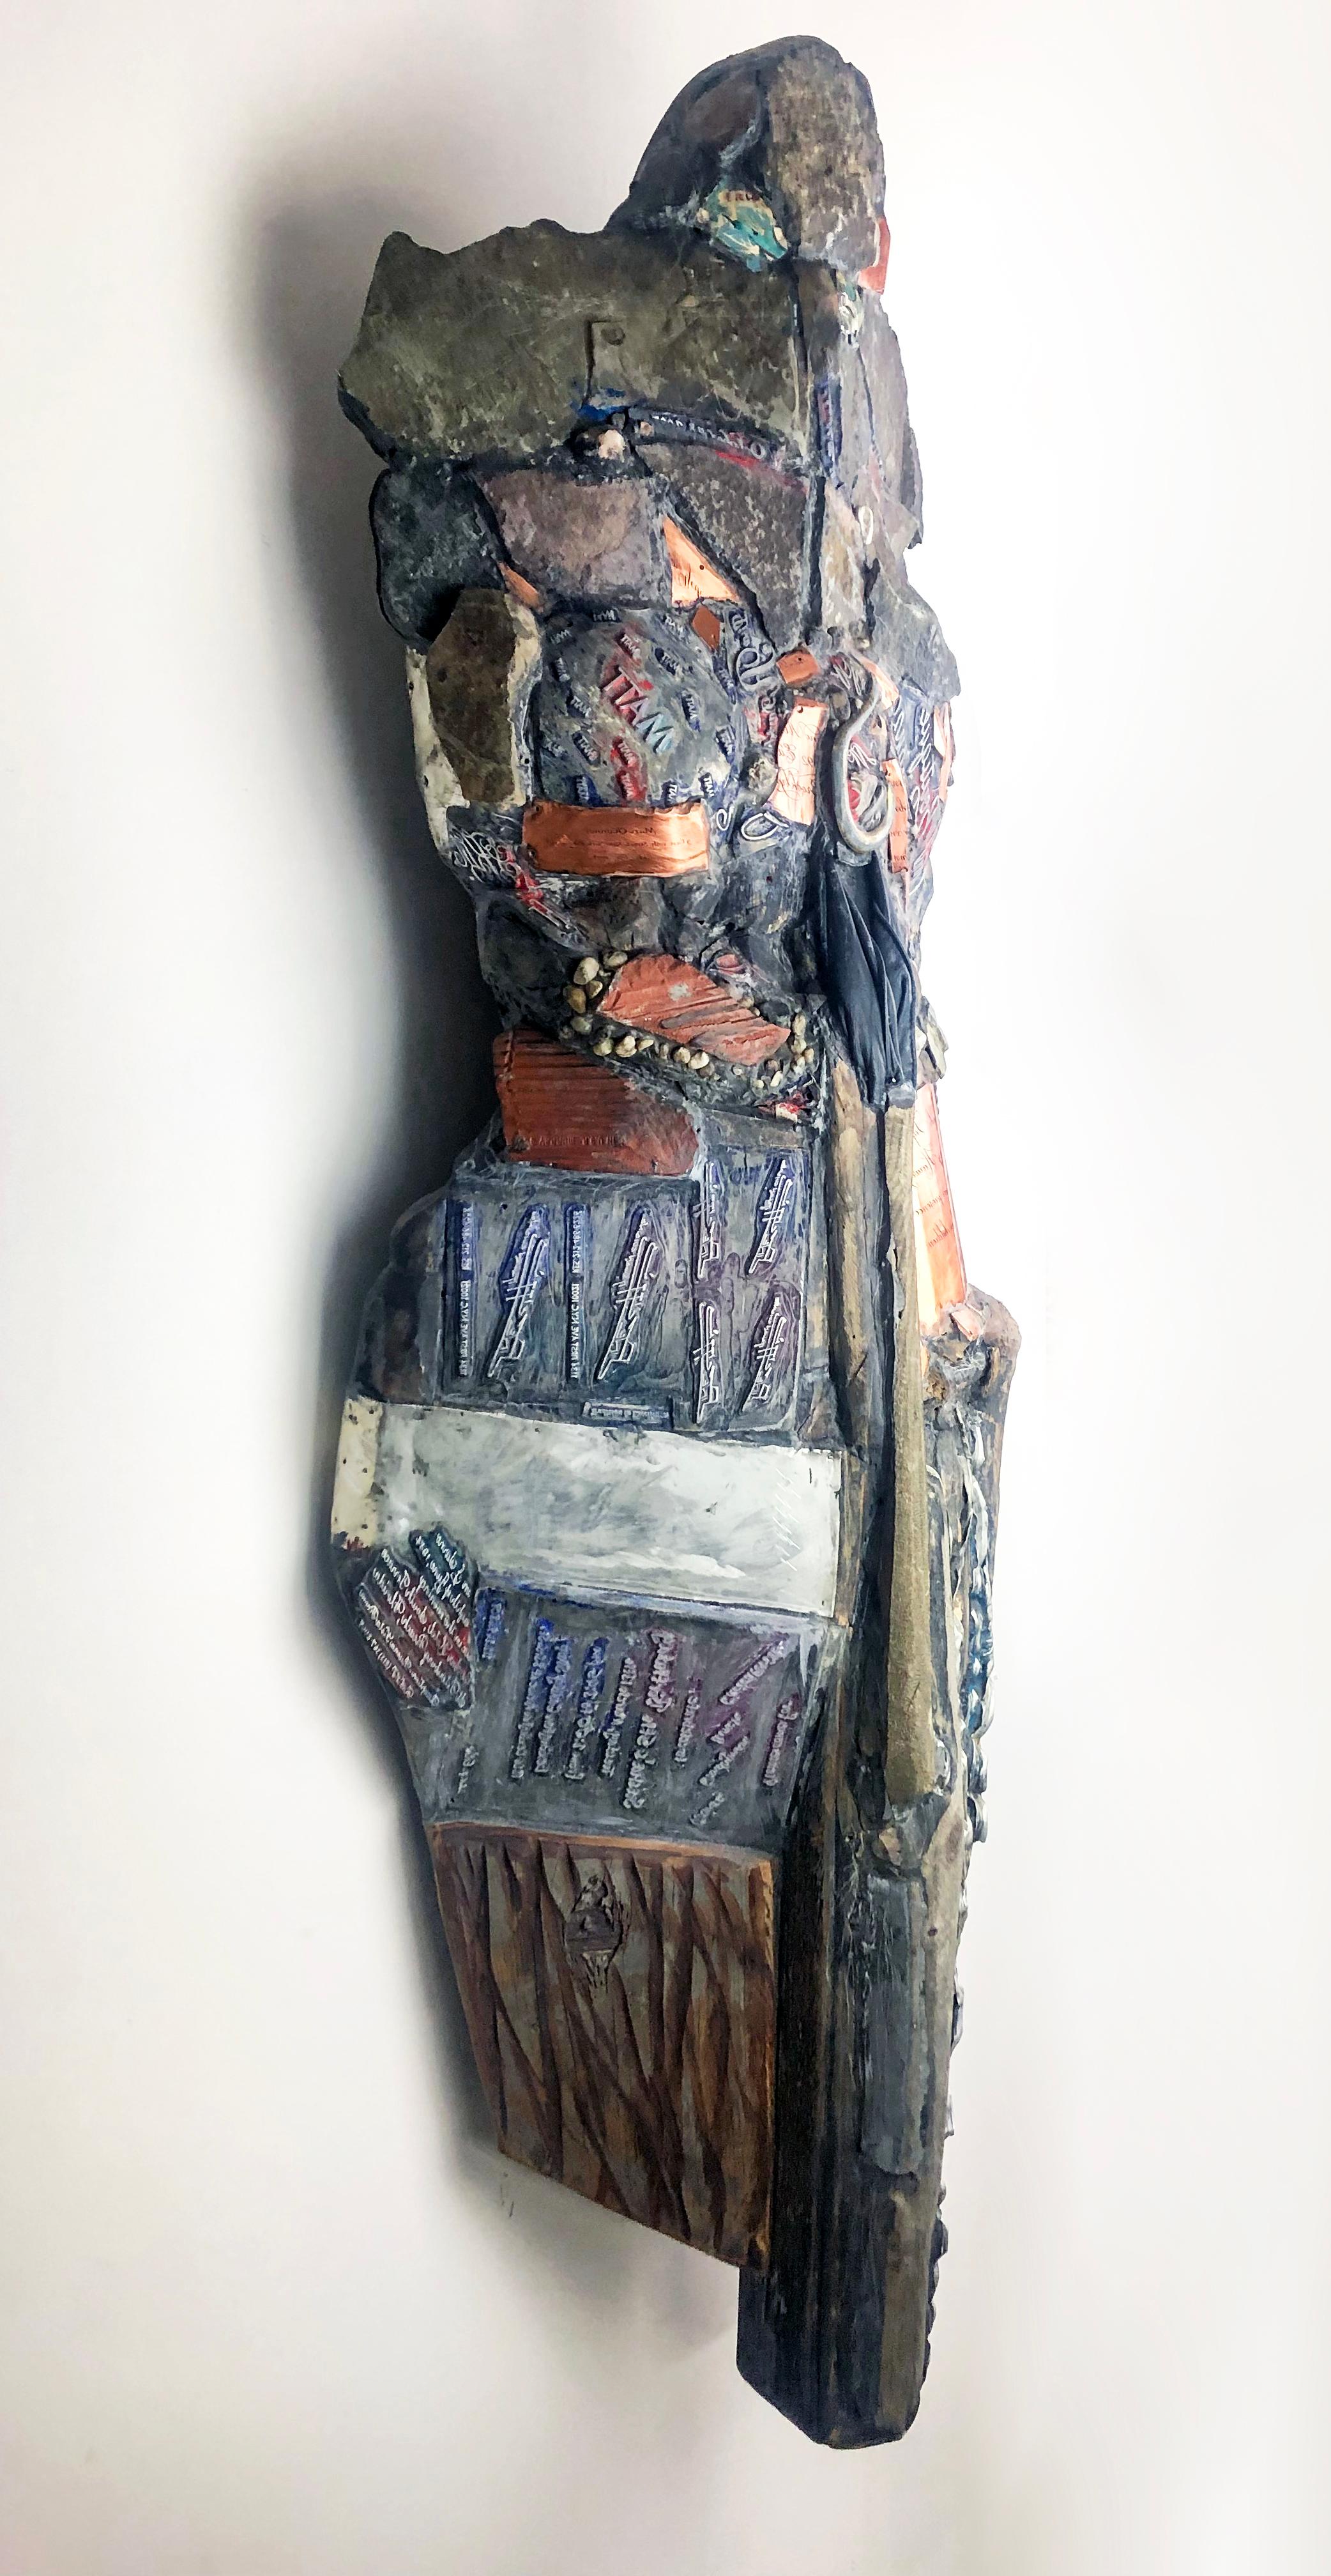 This sculpture from Linda Stein’s Knights of Protection series functions both as a defender in battle and a symbol of pacifism.  The series references popular and religious icons such as Wonder Woman, Princess Mononoke and the Buddhist goddess of